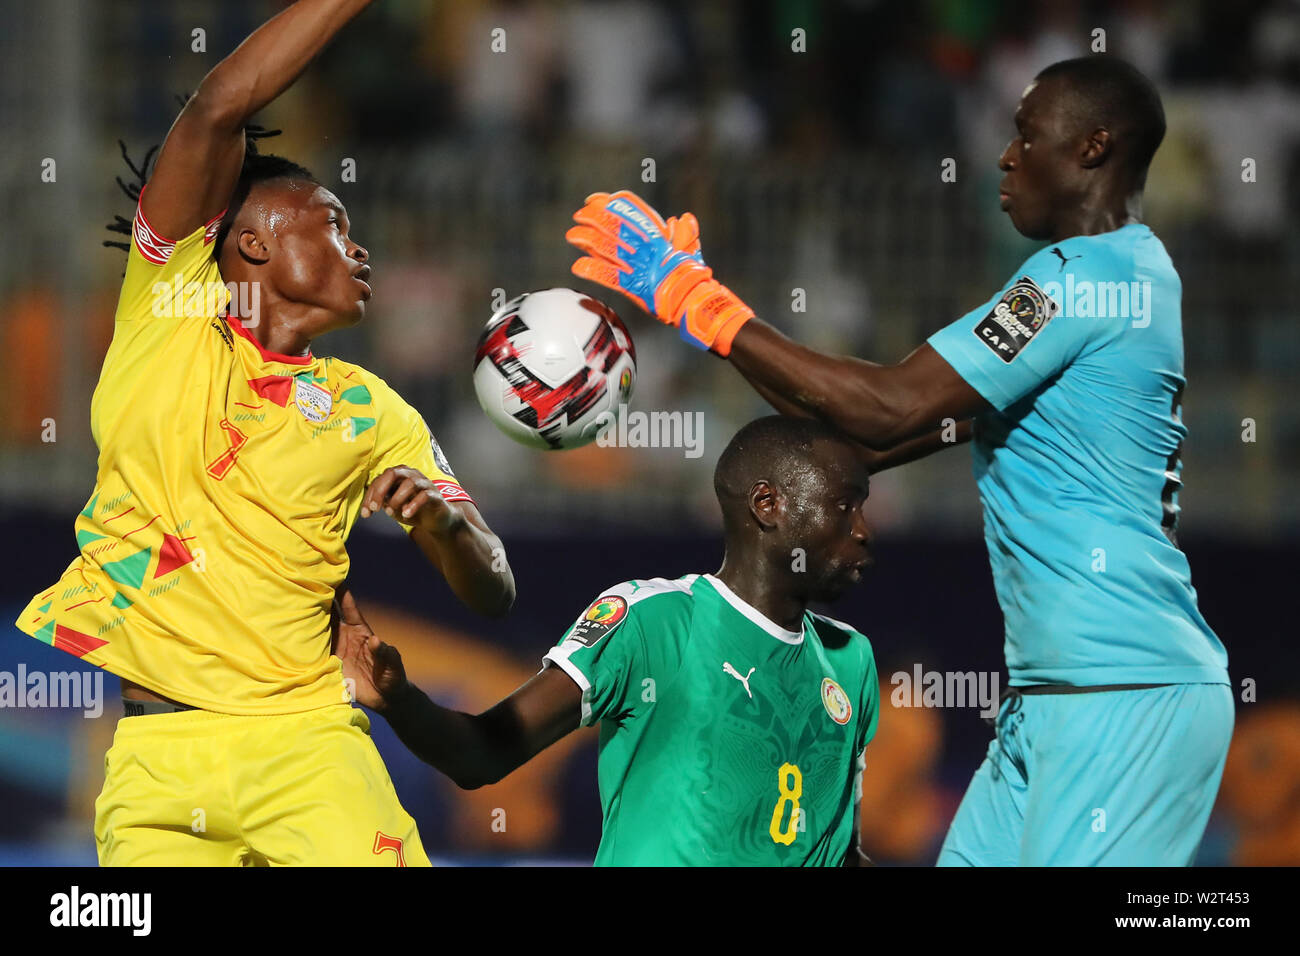 Cairo, Egypt. 10th July, 2019. Benin's David Djigla (L) in action against Senegal goalkeeper Alfred Gomis (R) during the 2019 Africa Cup of Nations quarter final soccer match between Senegal and Benin at the 30 June stadium. Credit: Omar Zoheiry/dpa/Alamy Live News Stock Photo